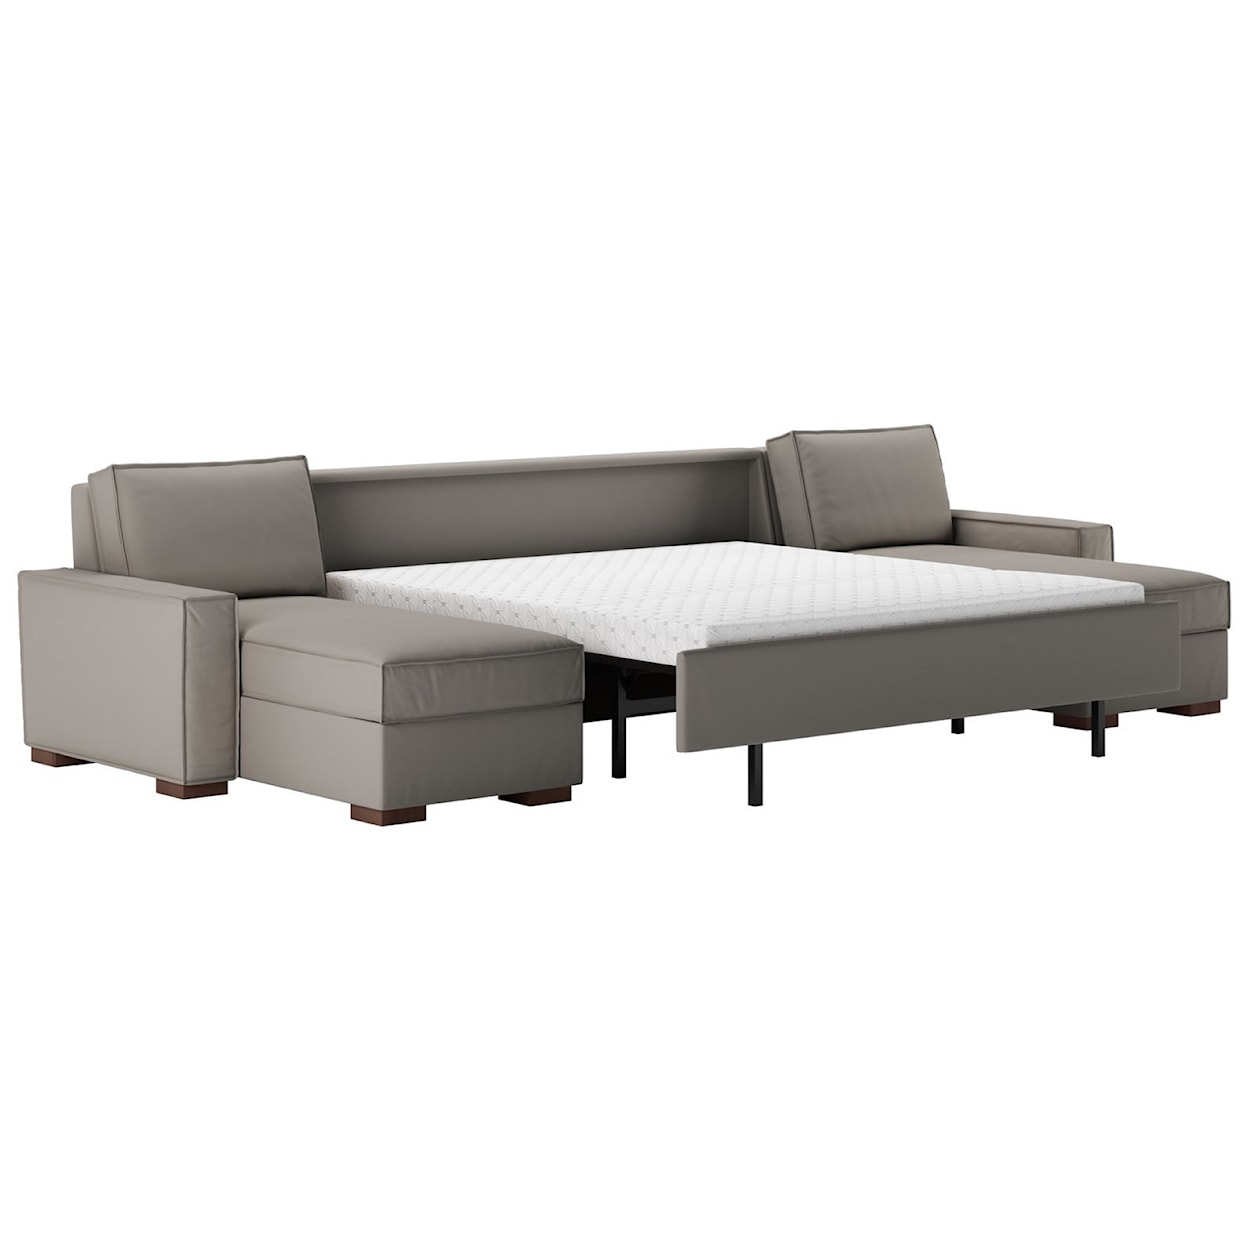 American Leather Madden 3 Pc Sectional w/ King Sleeper & 2 Chaise